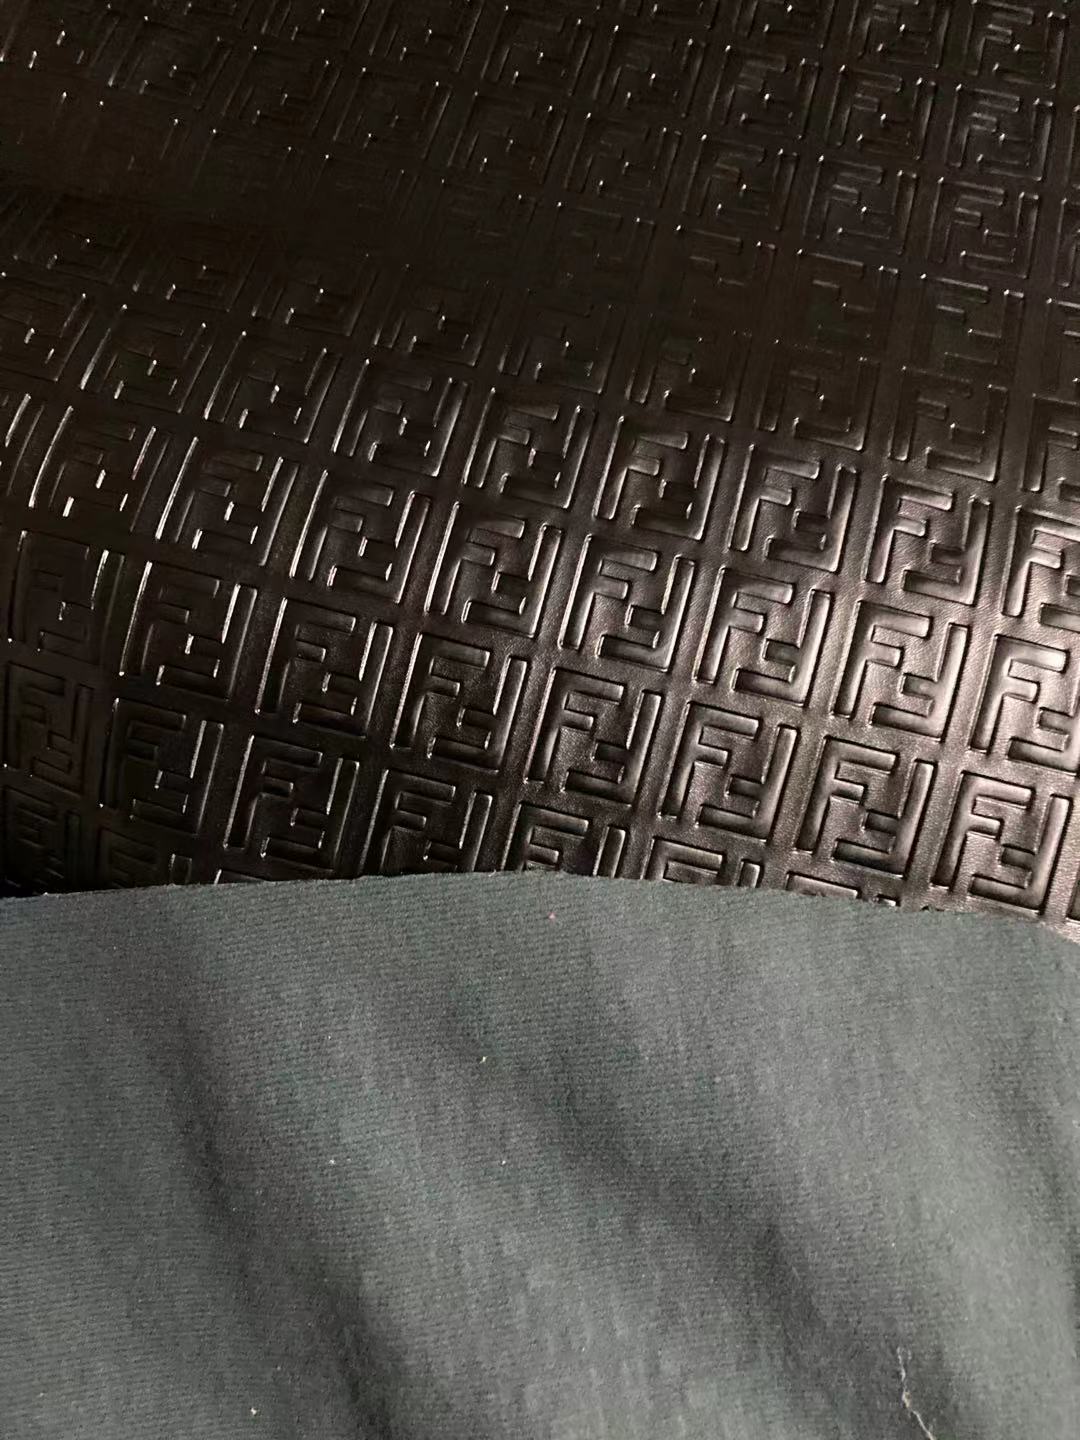 Premium Quality Fendi Embossed Soft Leather for Custom Sneakers Upholstery